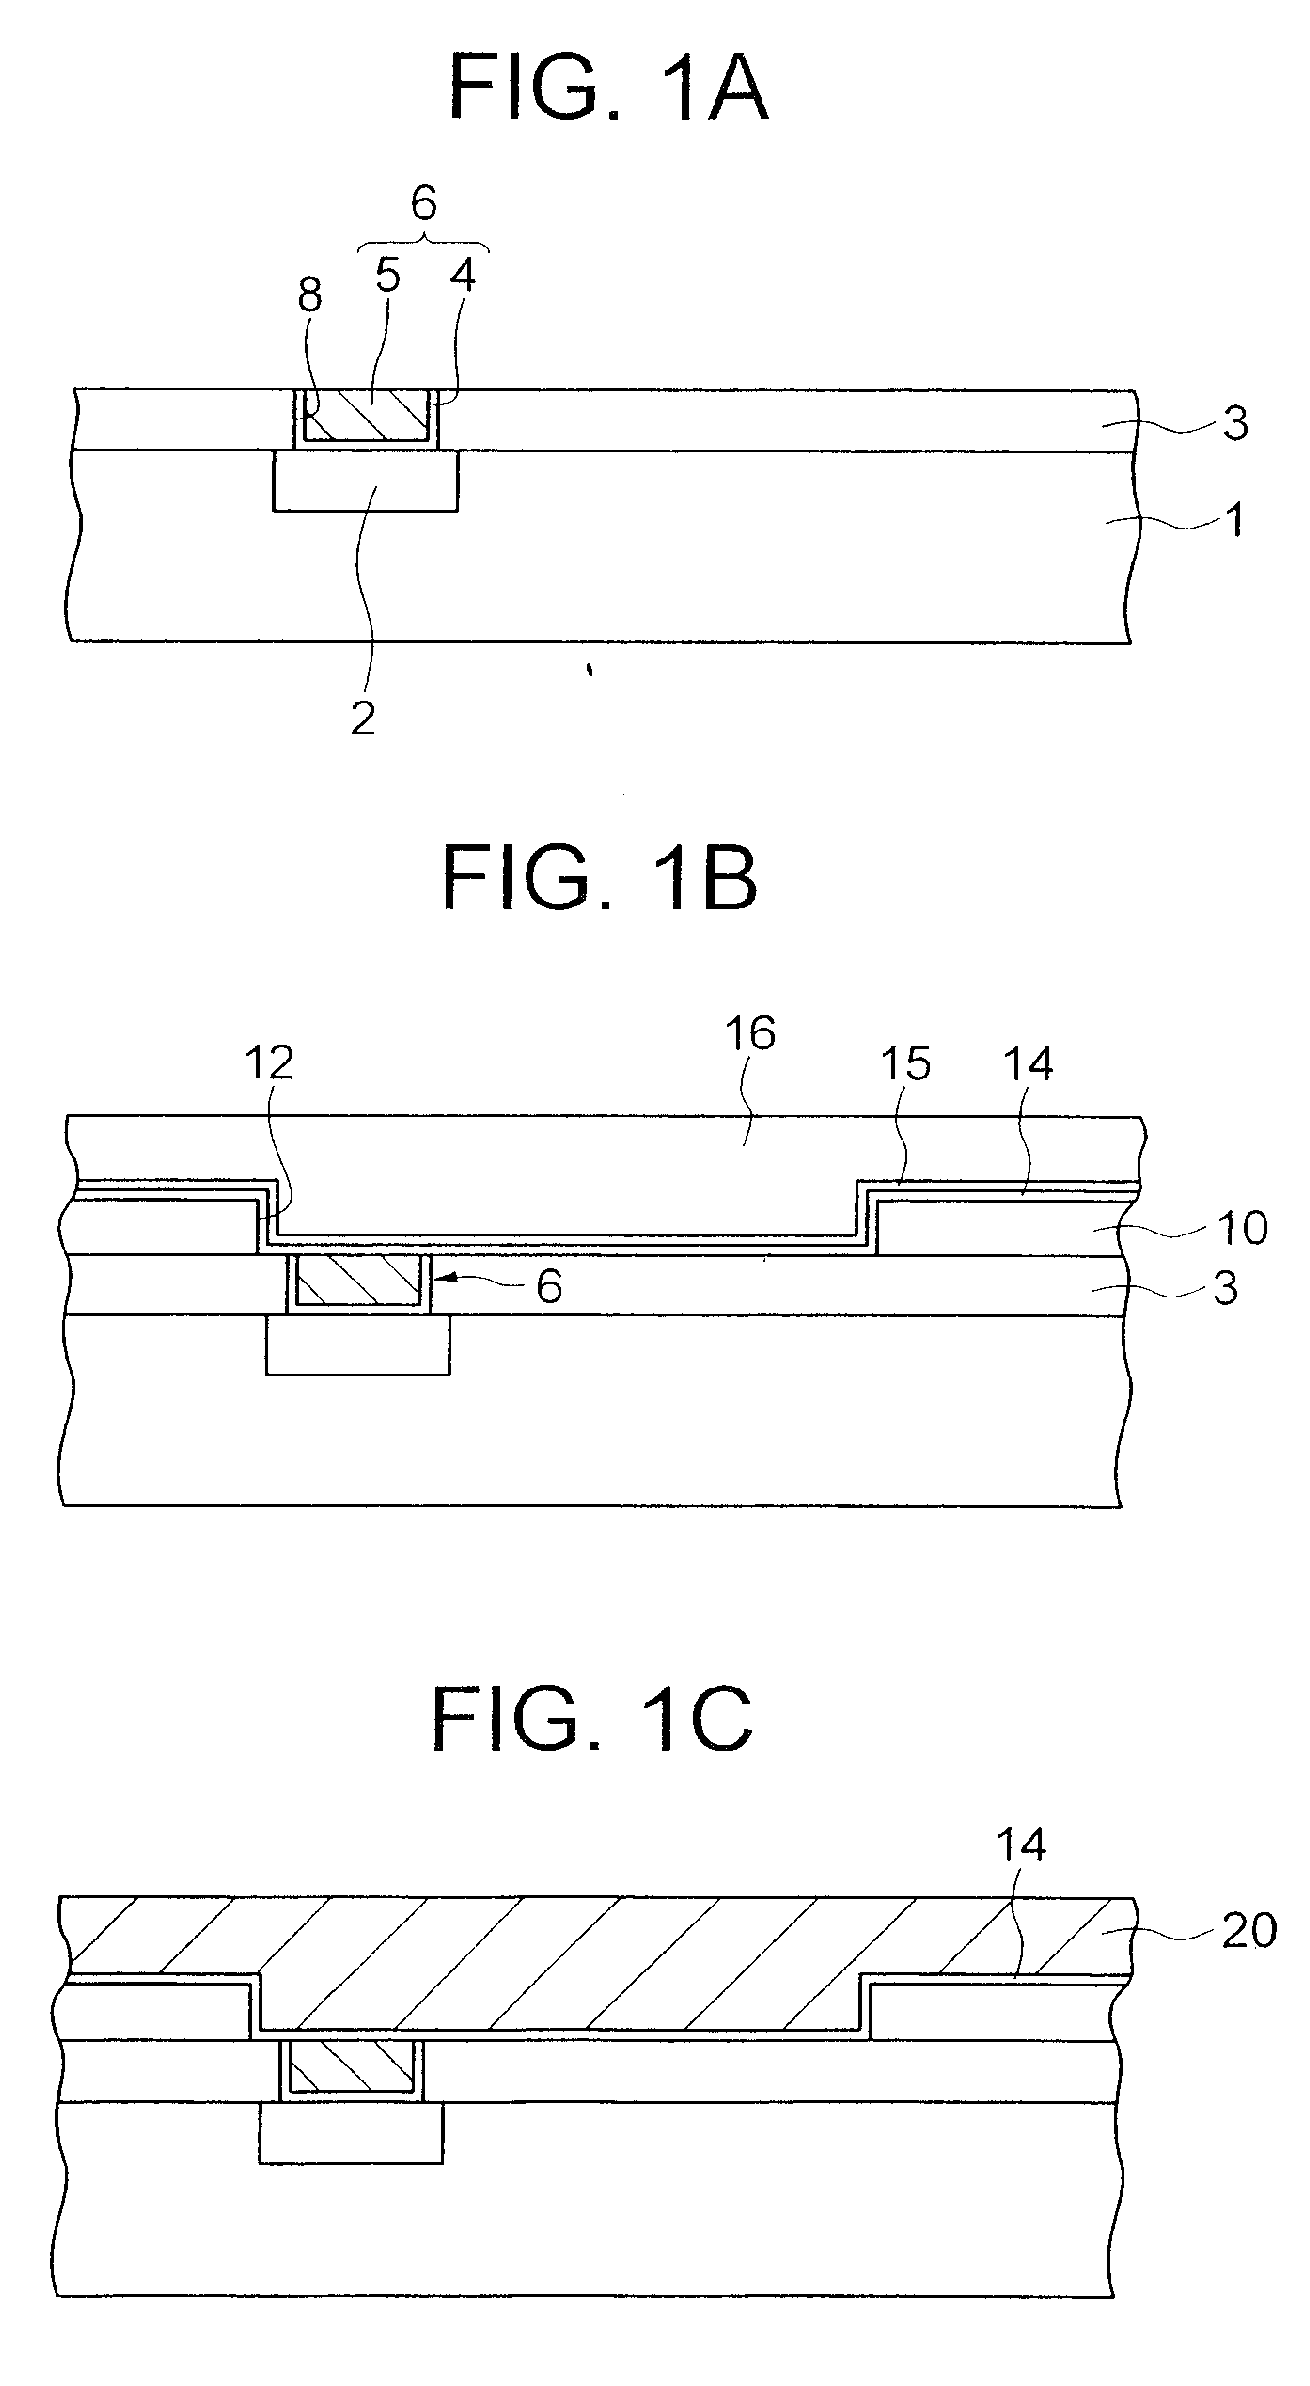 Semiconductor device having a cu interconnection